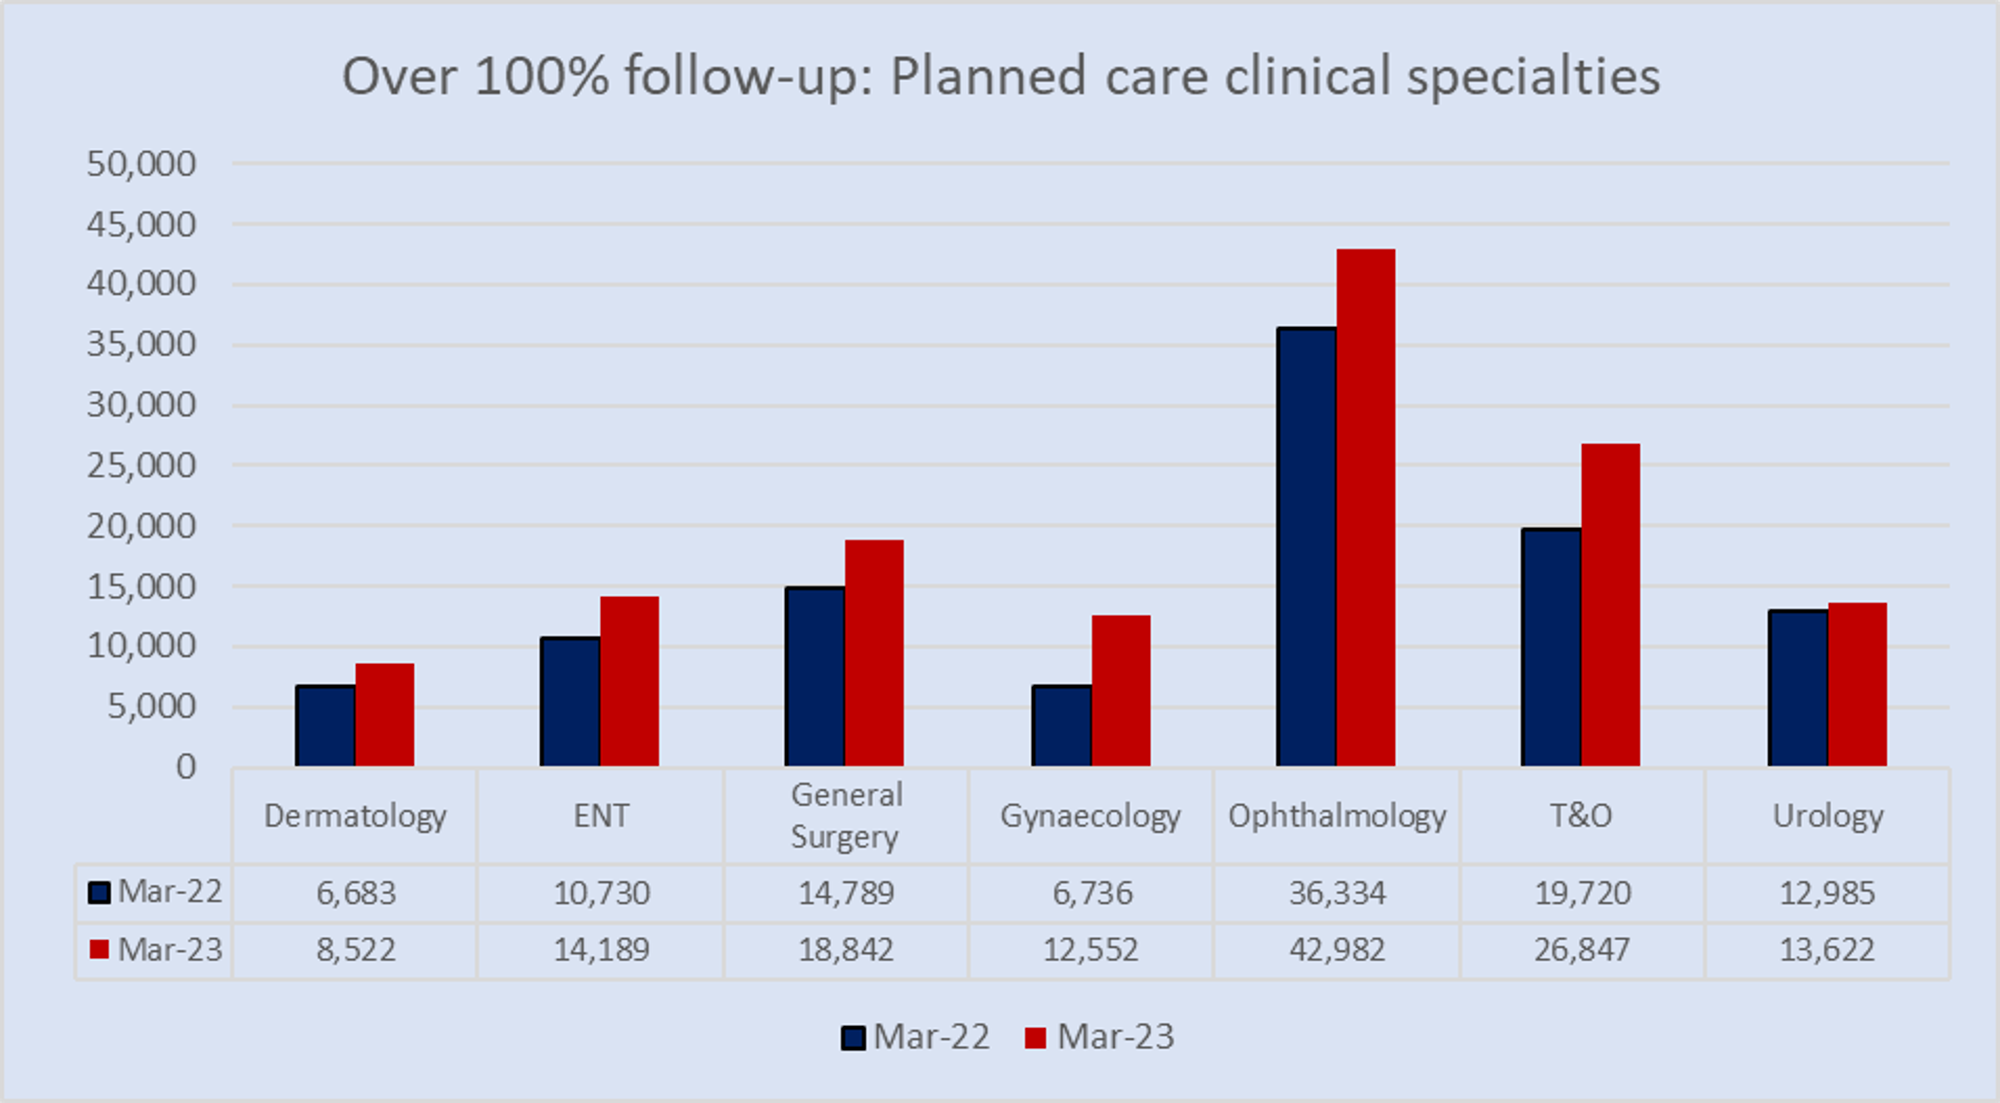 Bar chart on 100% follow up for planned care specialties between March 2022 to March 2023